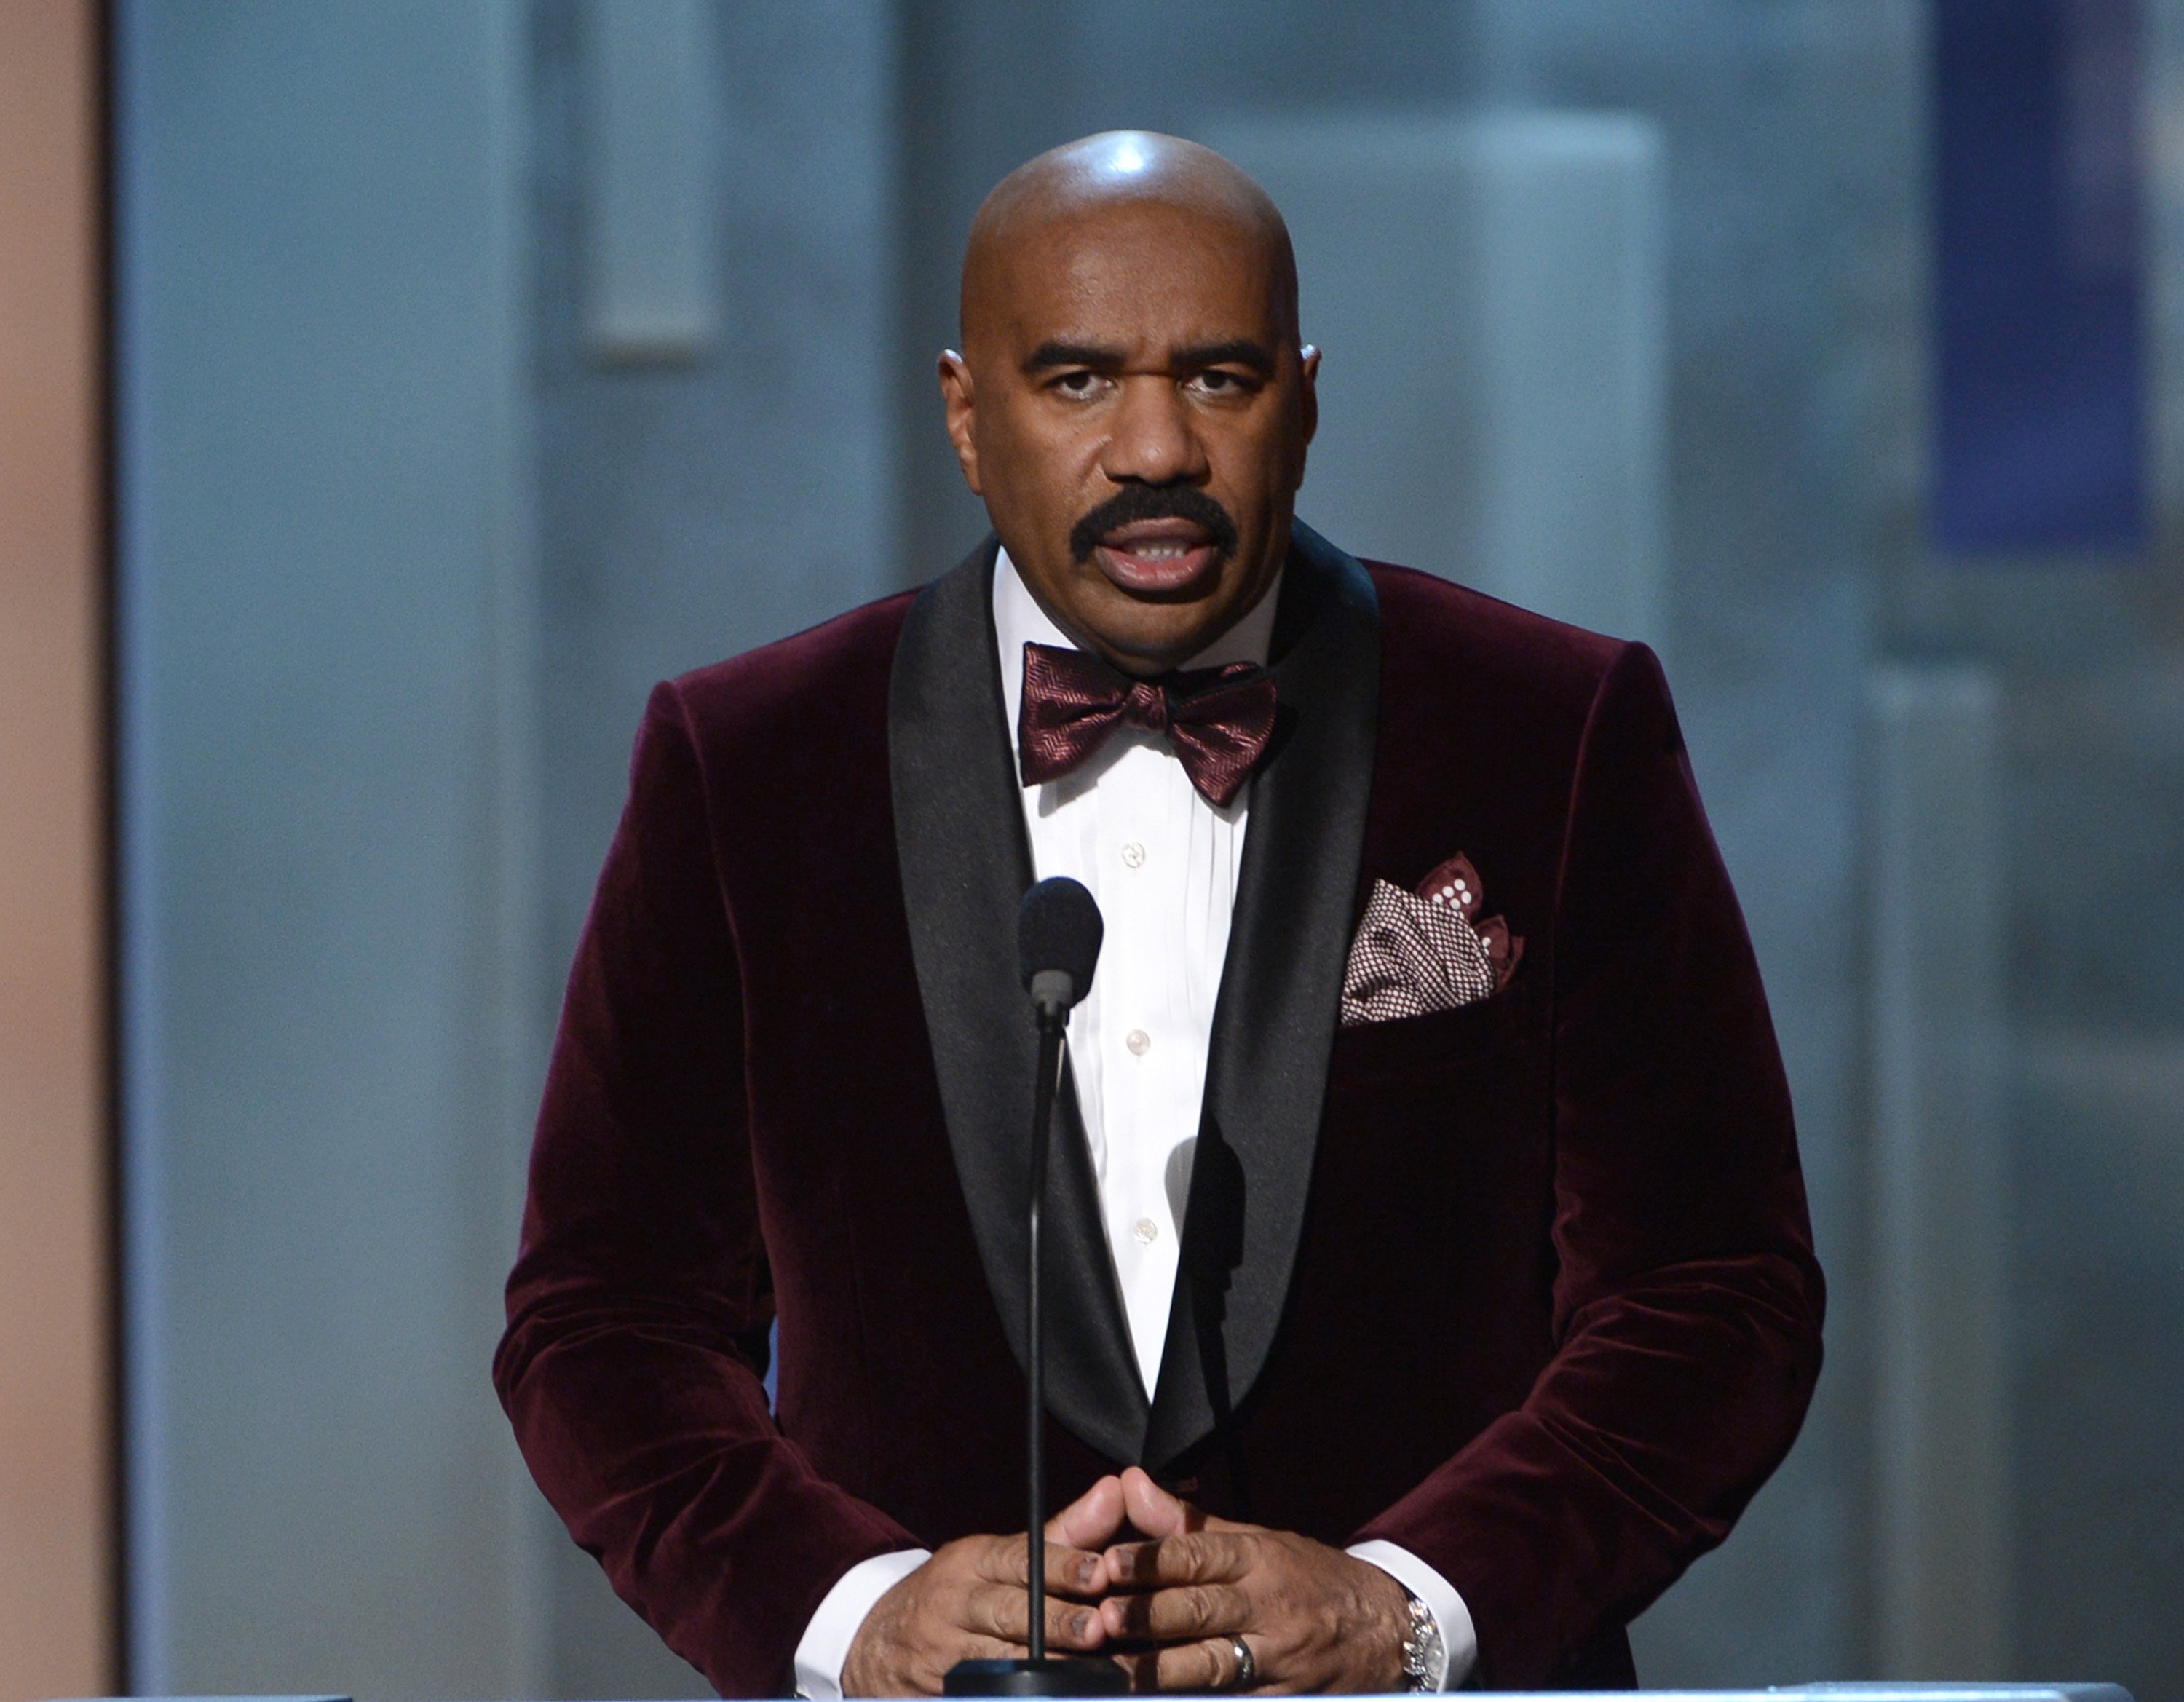 Steve Harvey on stage at the NAACP Image Awards in Los Angeles, California on February 1, 2013 | Photo: Getty Images